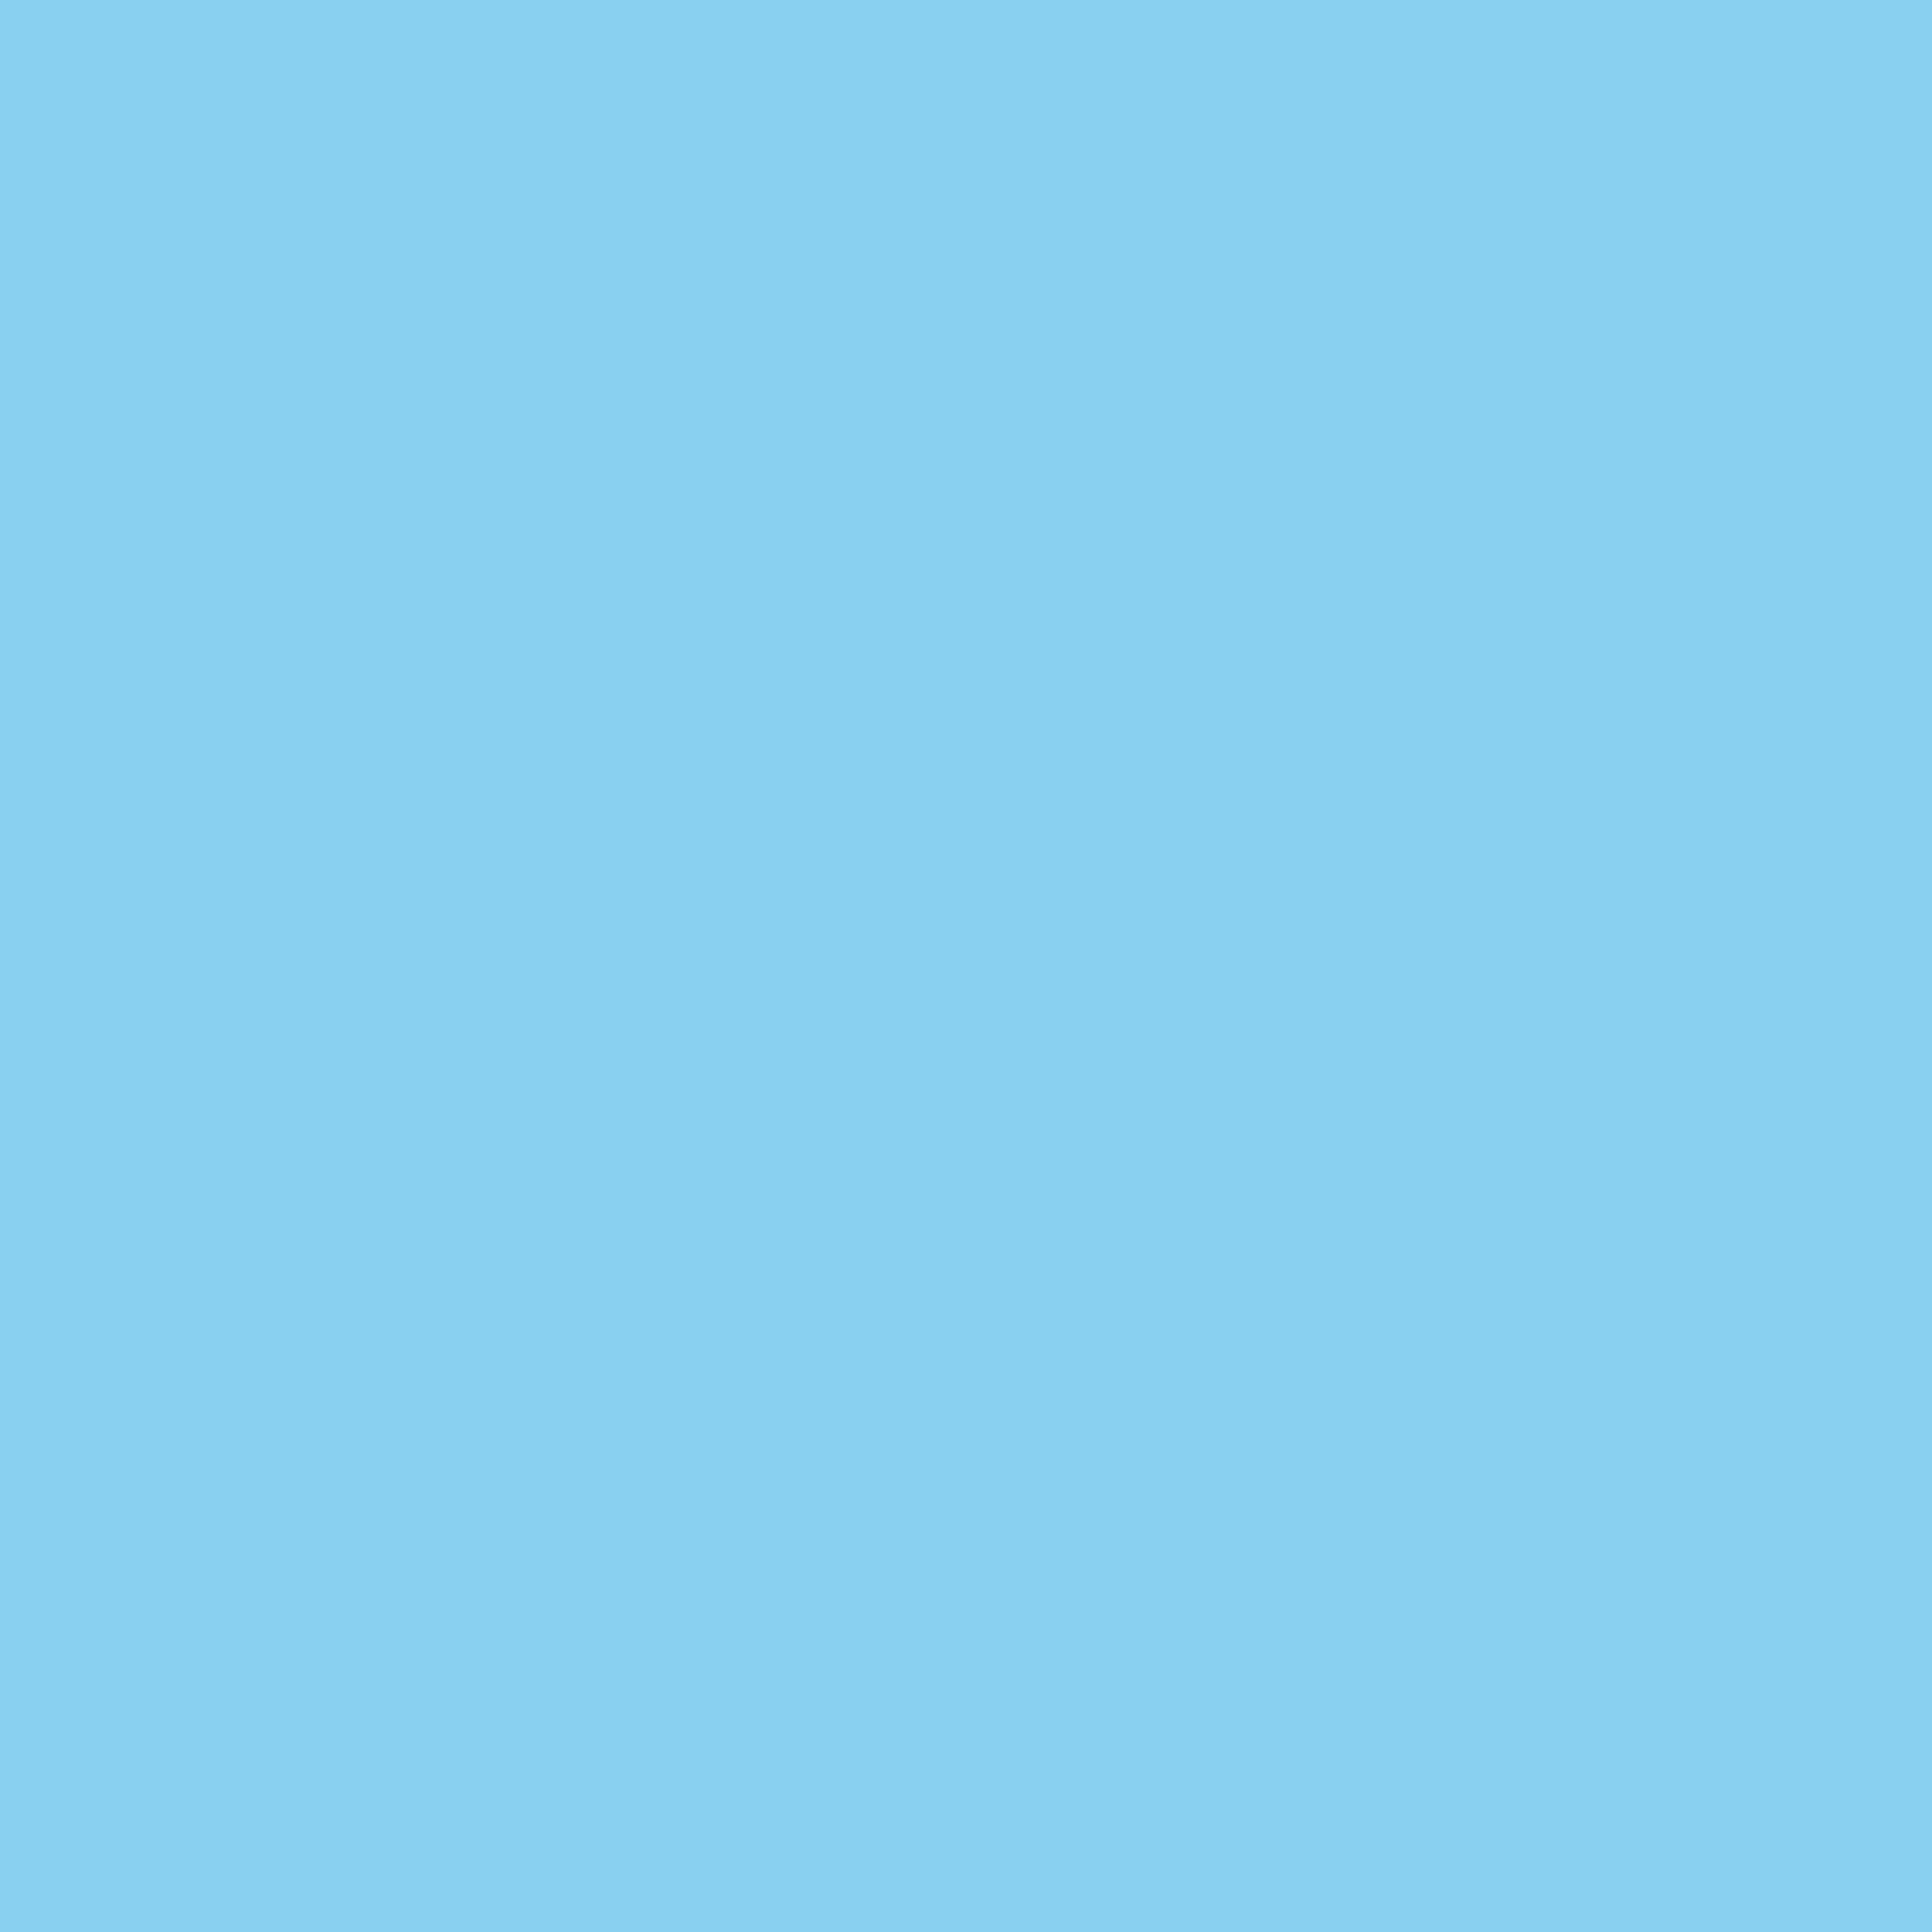 2048x2048 Baby Blue Solid Color Background